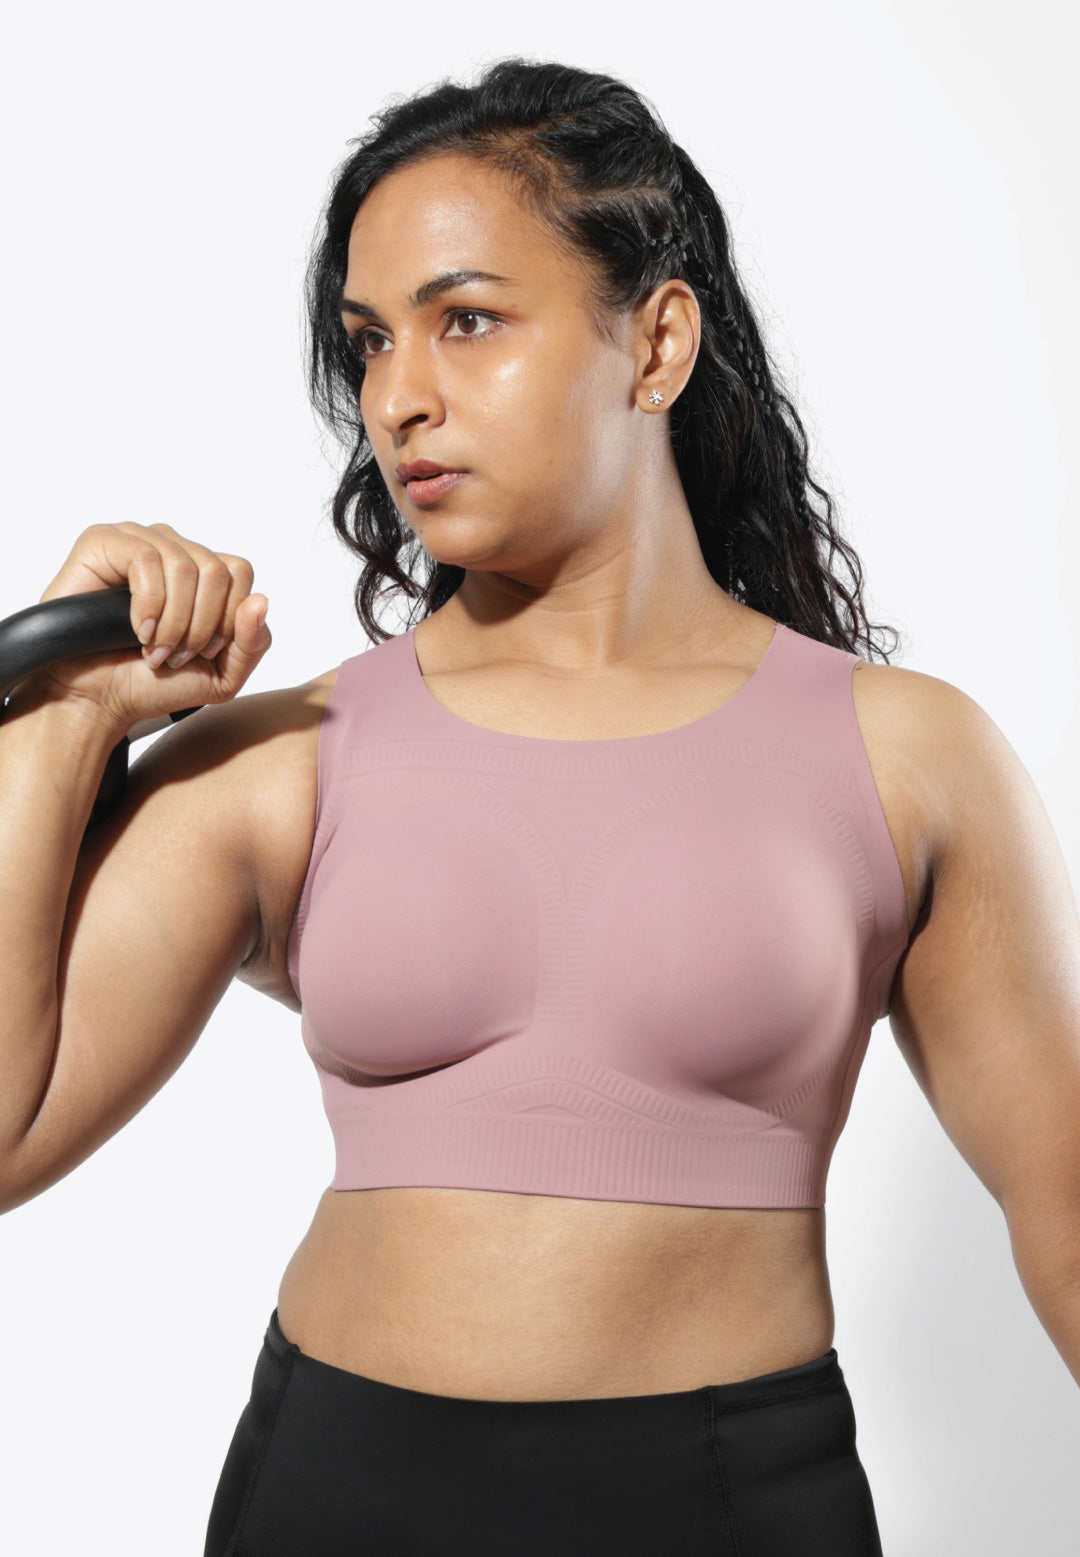 Breast Band, No-Bounce, High Impact Sports Bra Support Band